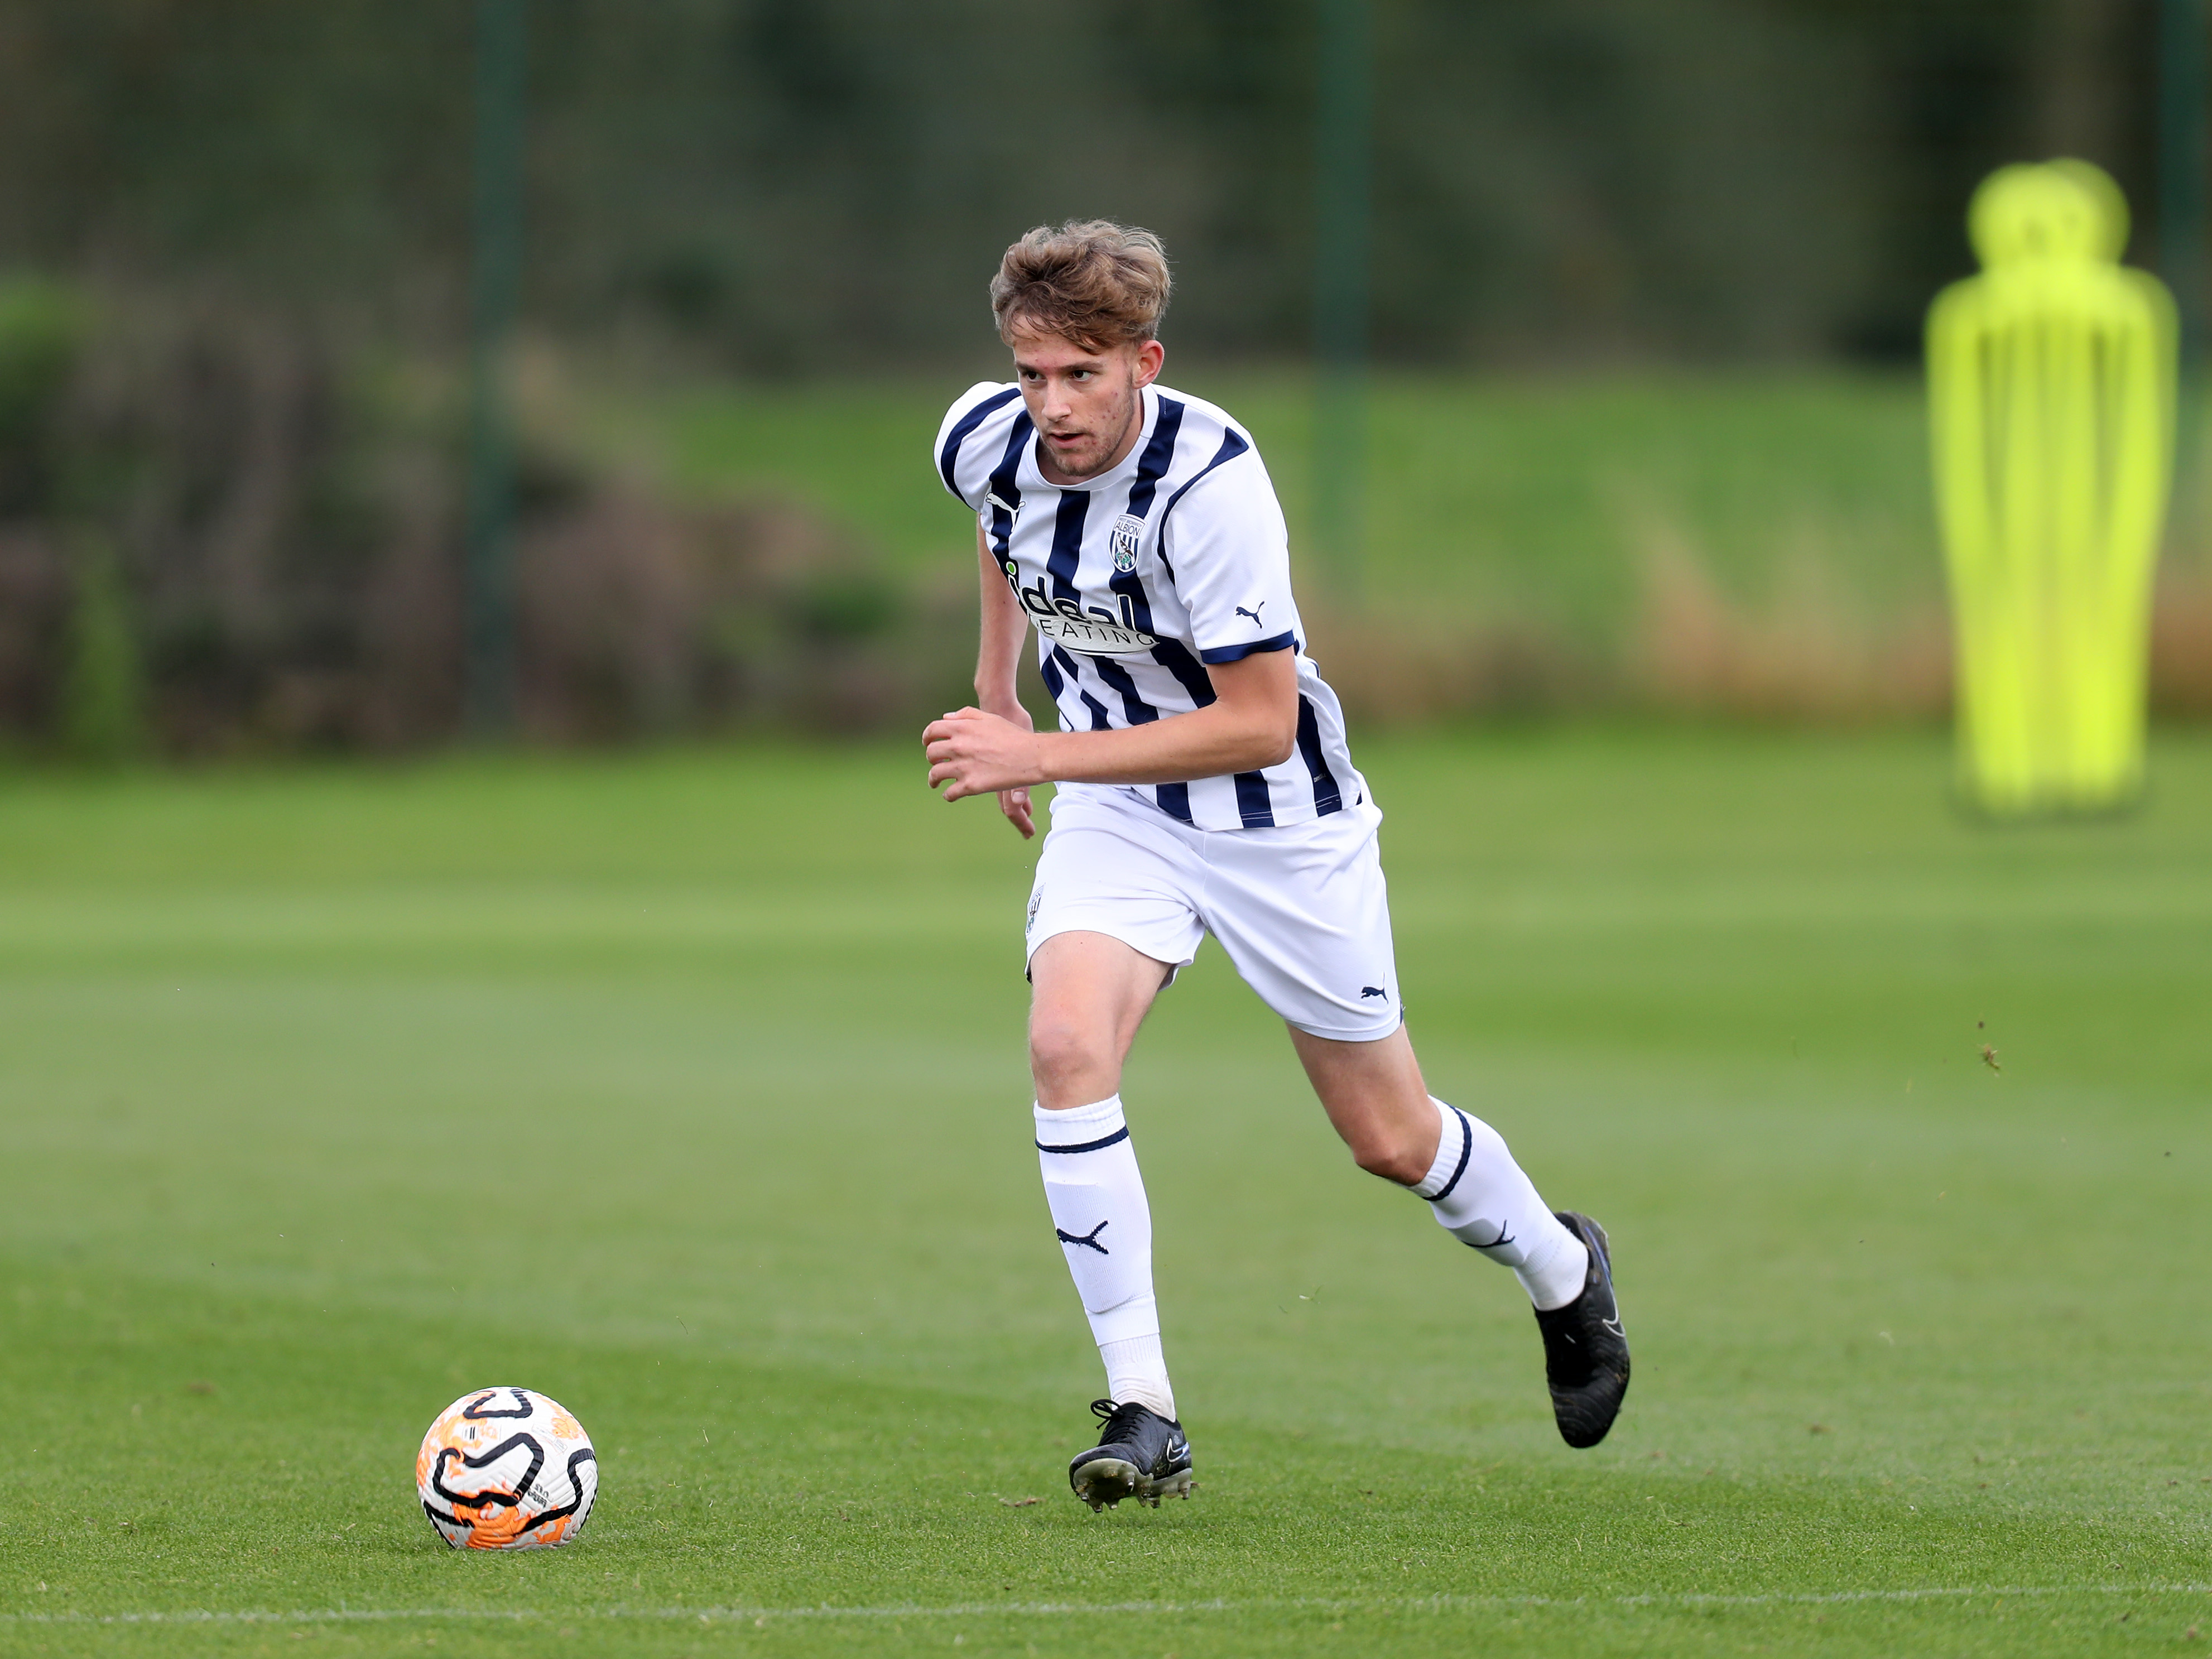 A photo of Albion U18s defender Rhys Morrish, in the 23/24 home kit, in action at the club's Walsall training ground